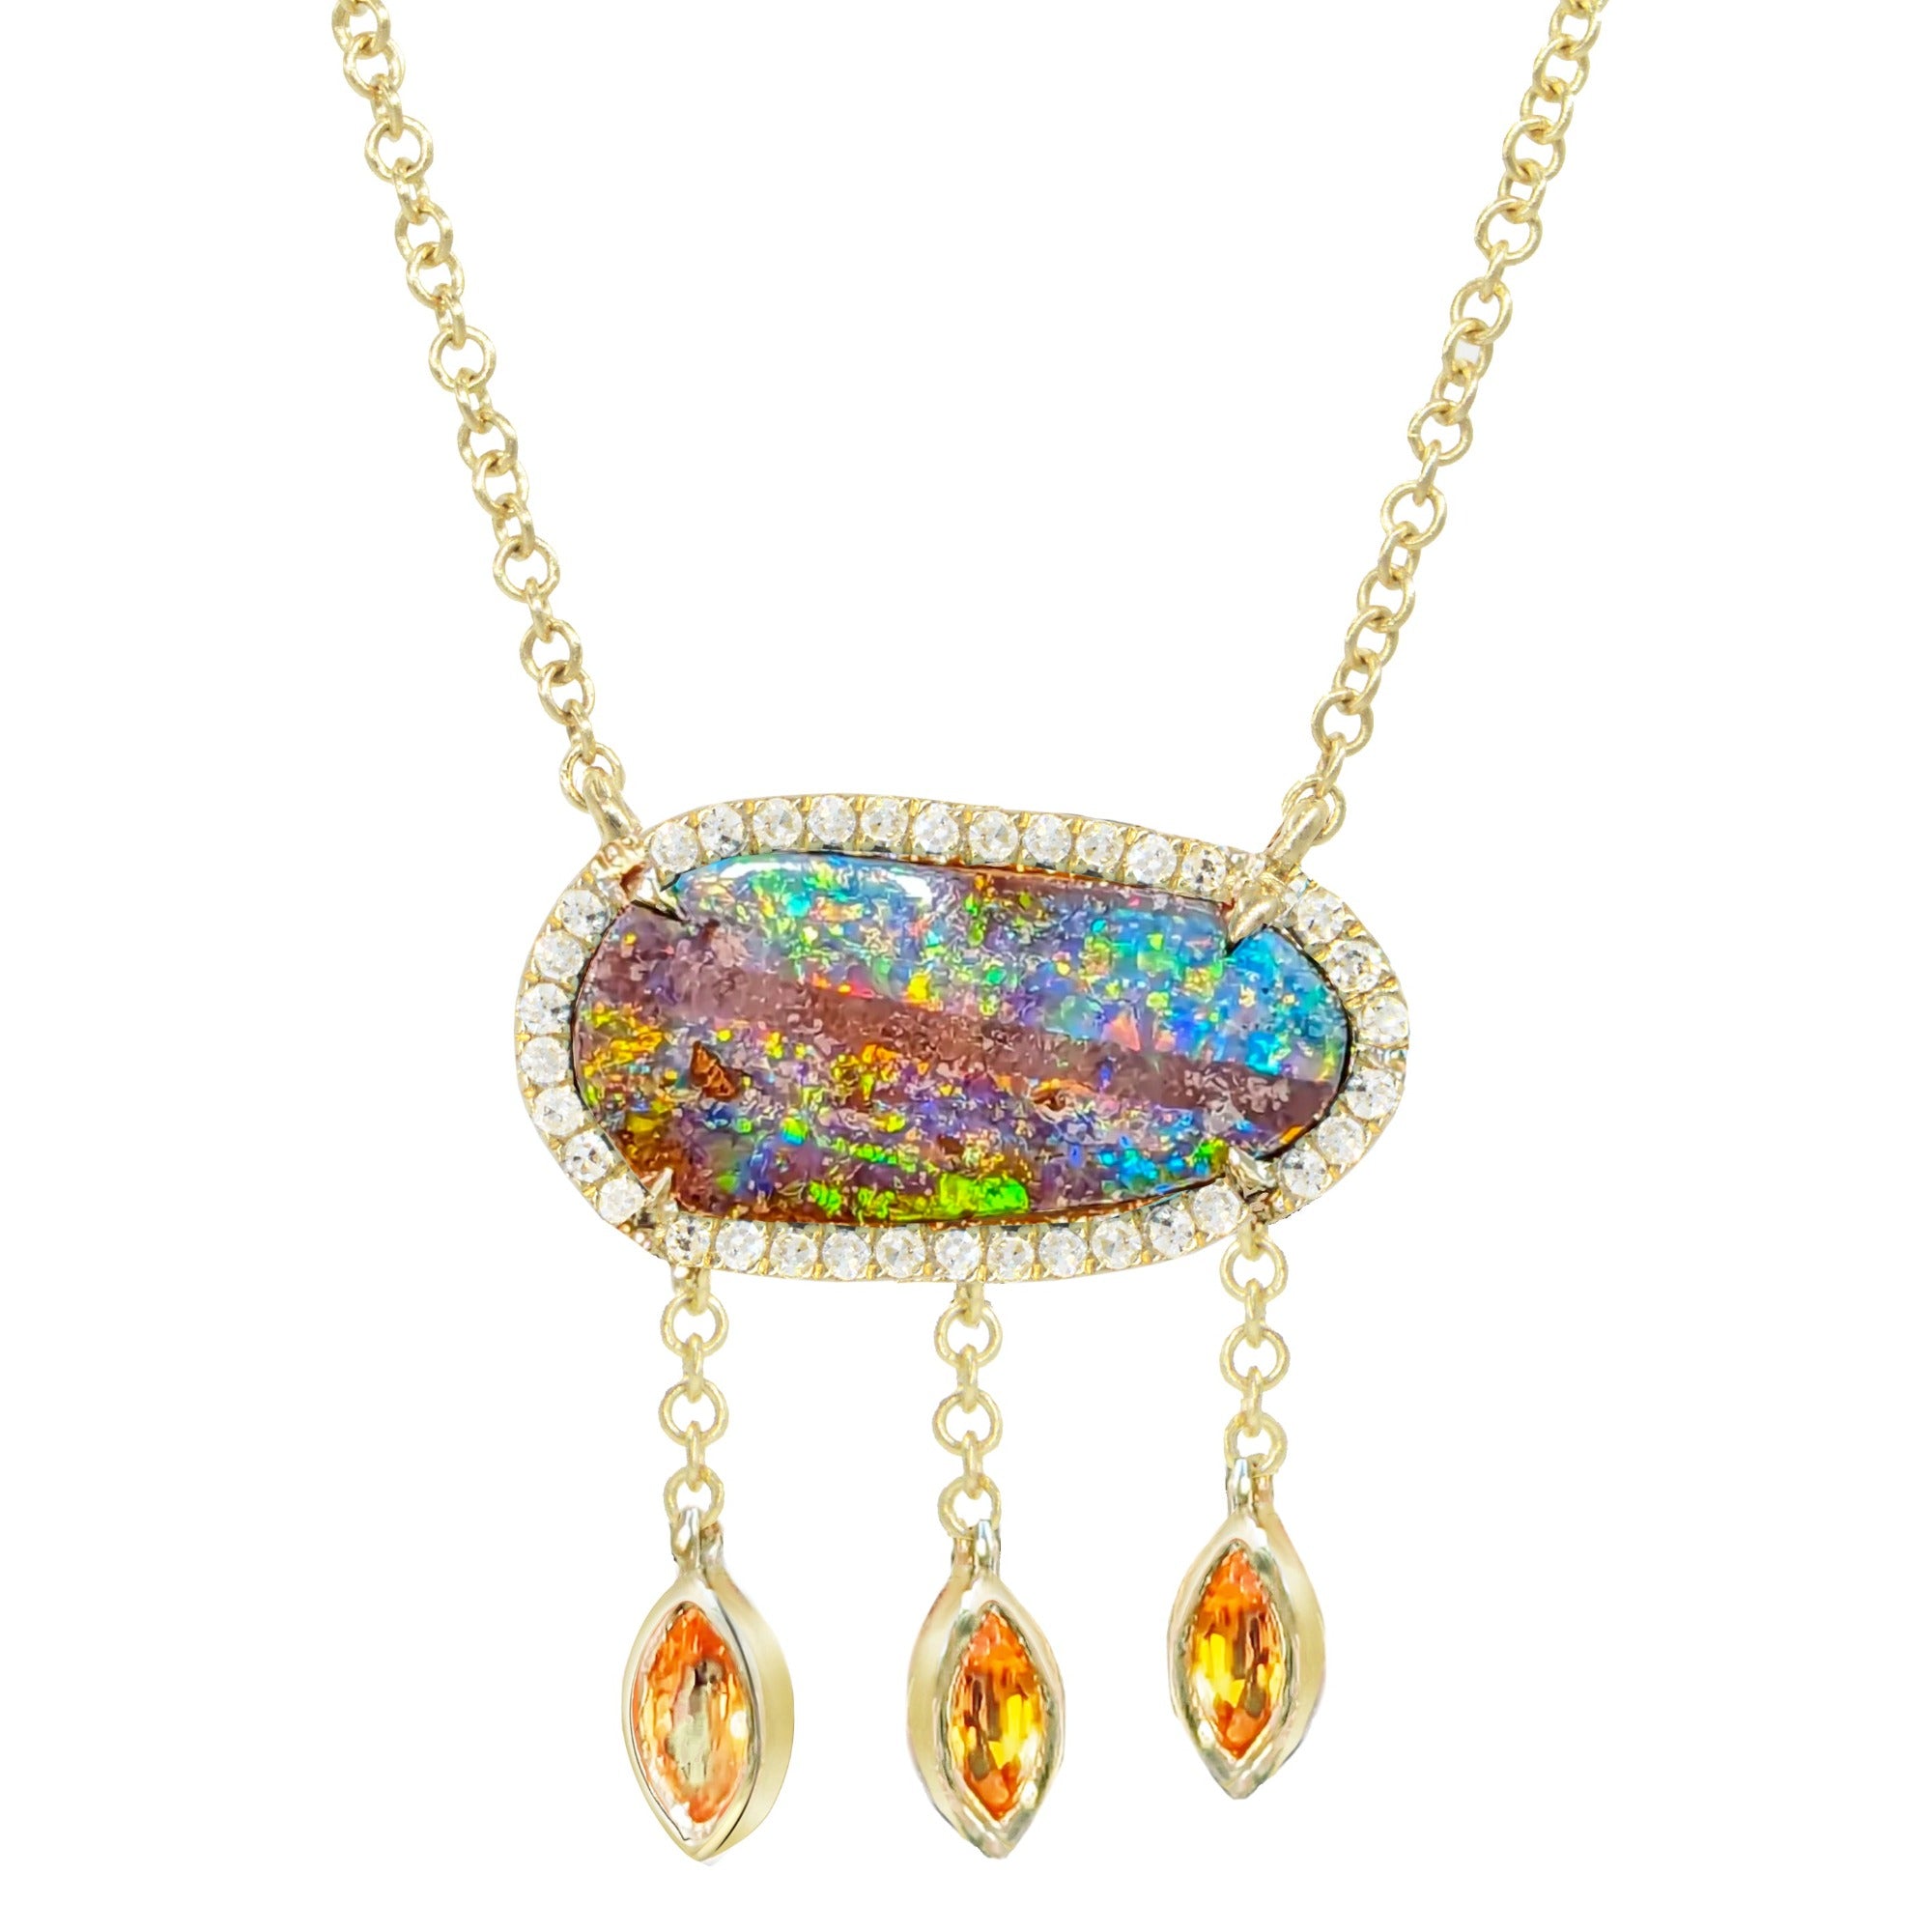 boulder opal necklace with marquise sapphire drops and diamonds